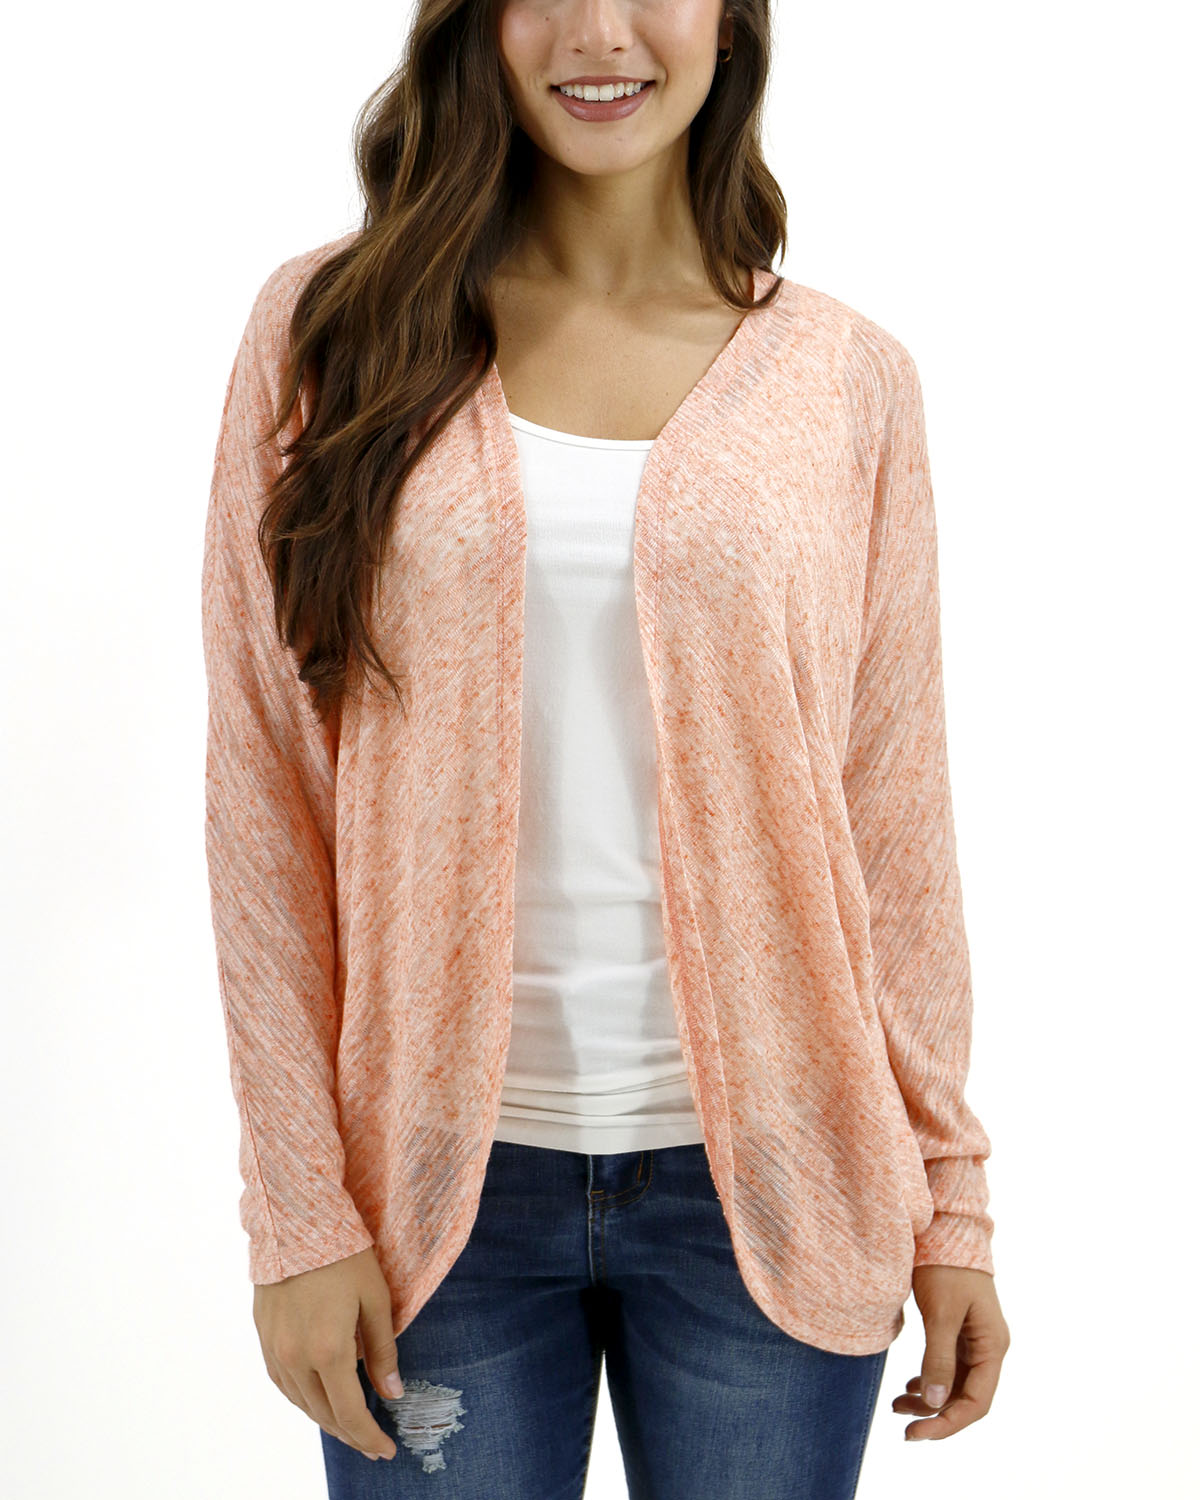 Grace Cocoon - - Slub SALE Dreamsicle Airy in FINAL and Lace Cardigan